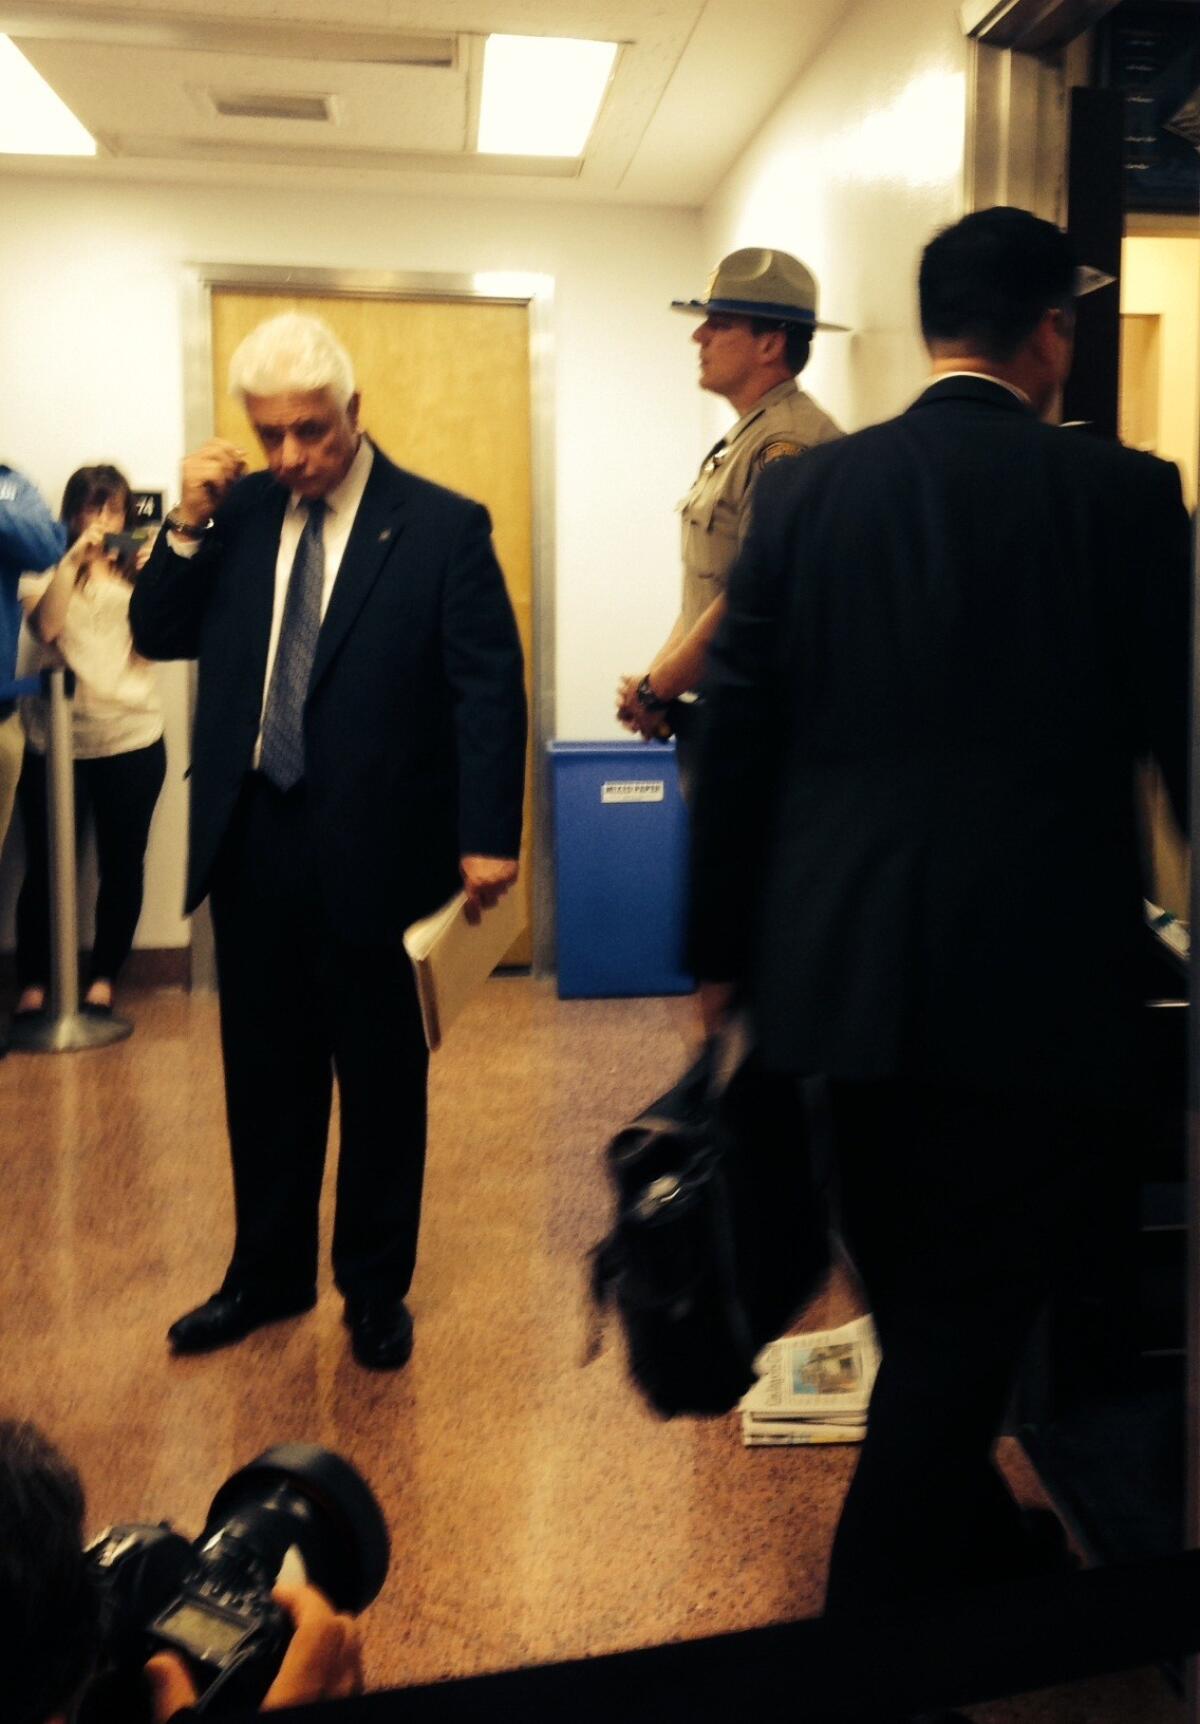 Senate Sergeant at Arms Tony Beard, left, stands by as a federal agent enters the Capitol office of Sen. Leland Yee (D-San Francisco), who was arrested Wednesday morning.